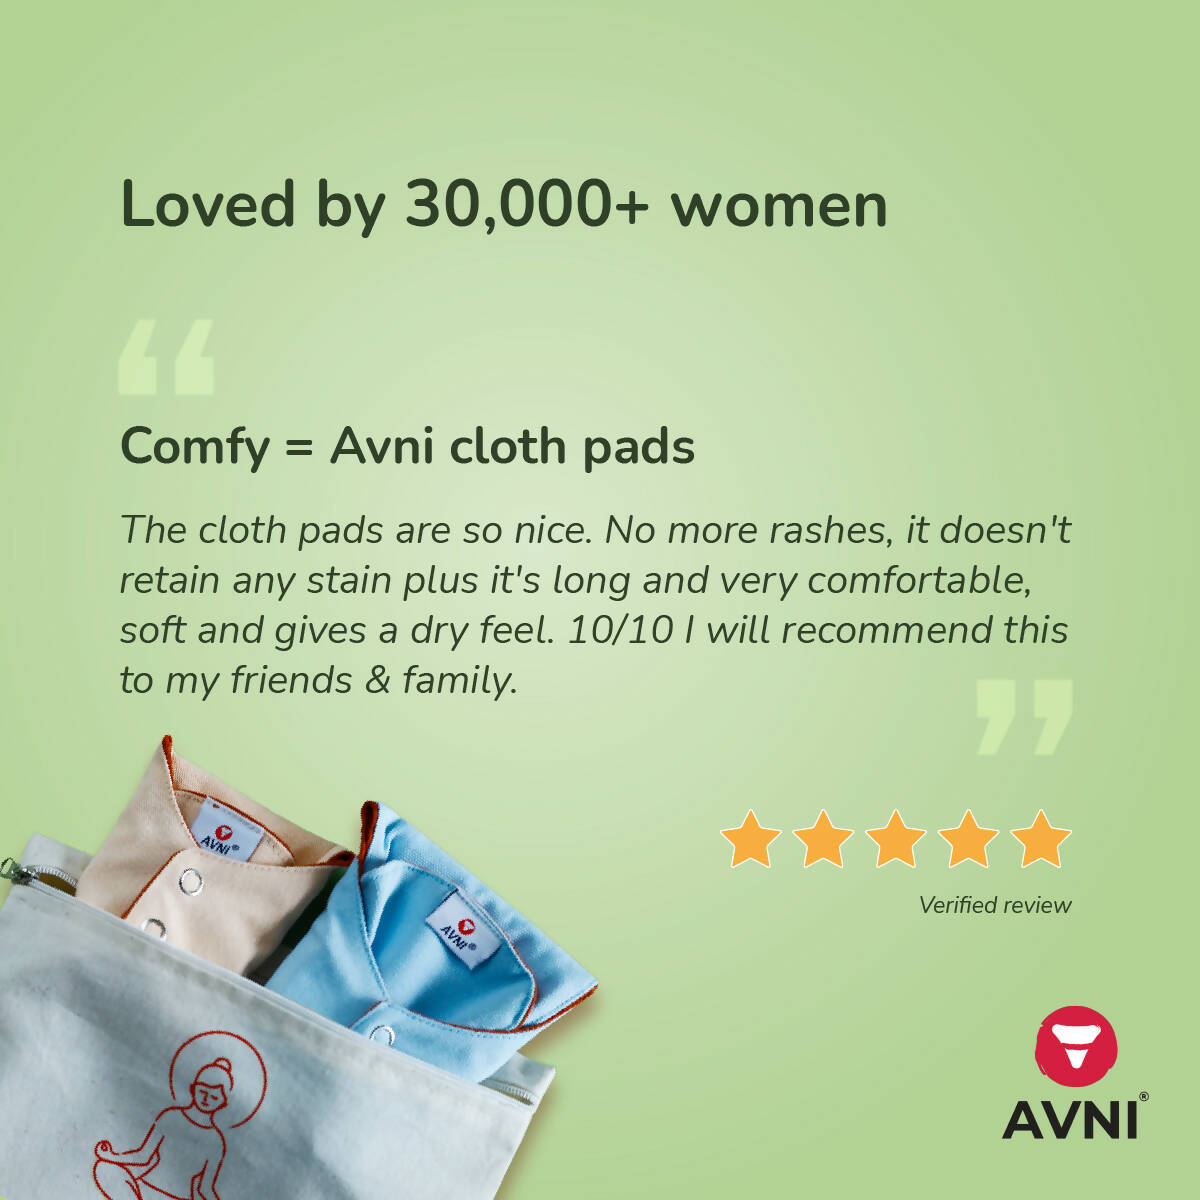 Avni Lush Certified 100% Organic Cotton Washable Cloth Pads, 3 R + 1 L (3 X 240MM + 1 X 280MM, Pack of 4) | Antimicrobial Reusable Cloth Sanitary Pad | With Cloth Storage pouch Wemy Store